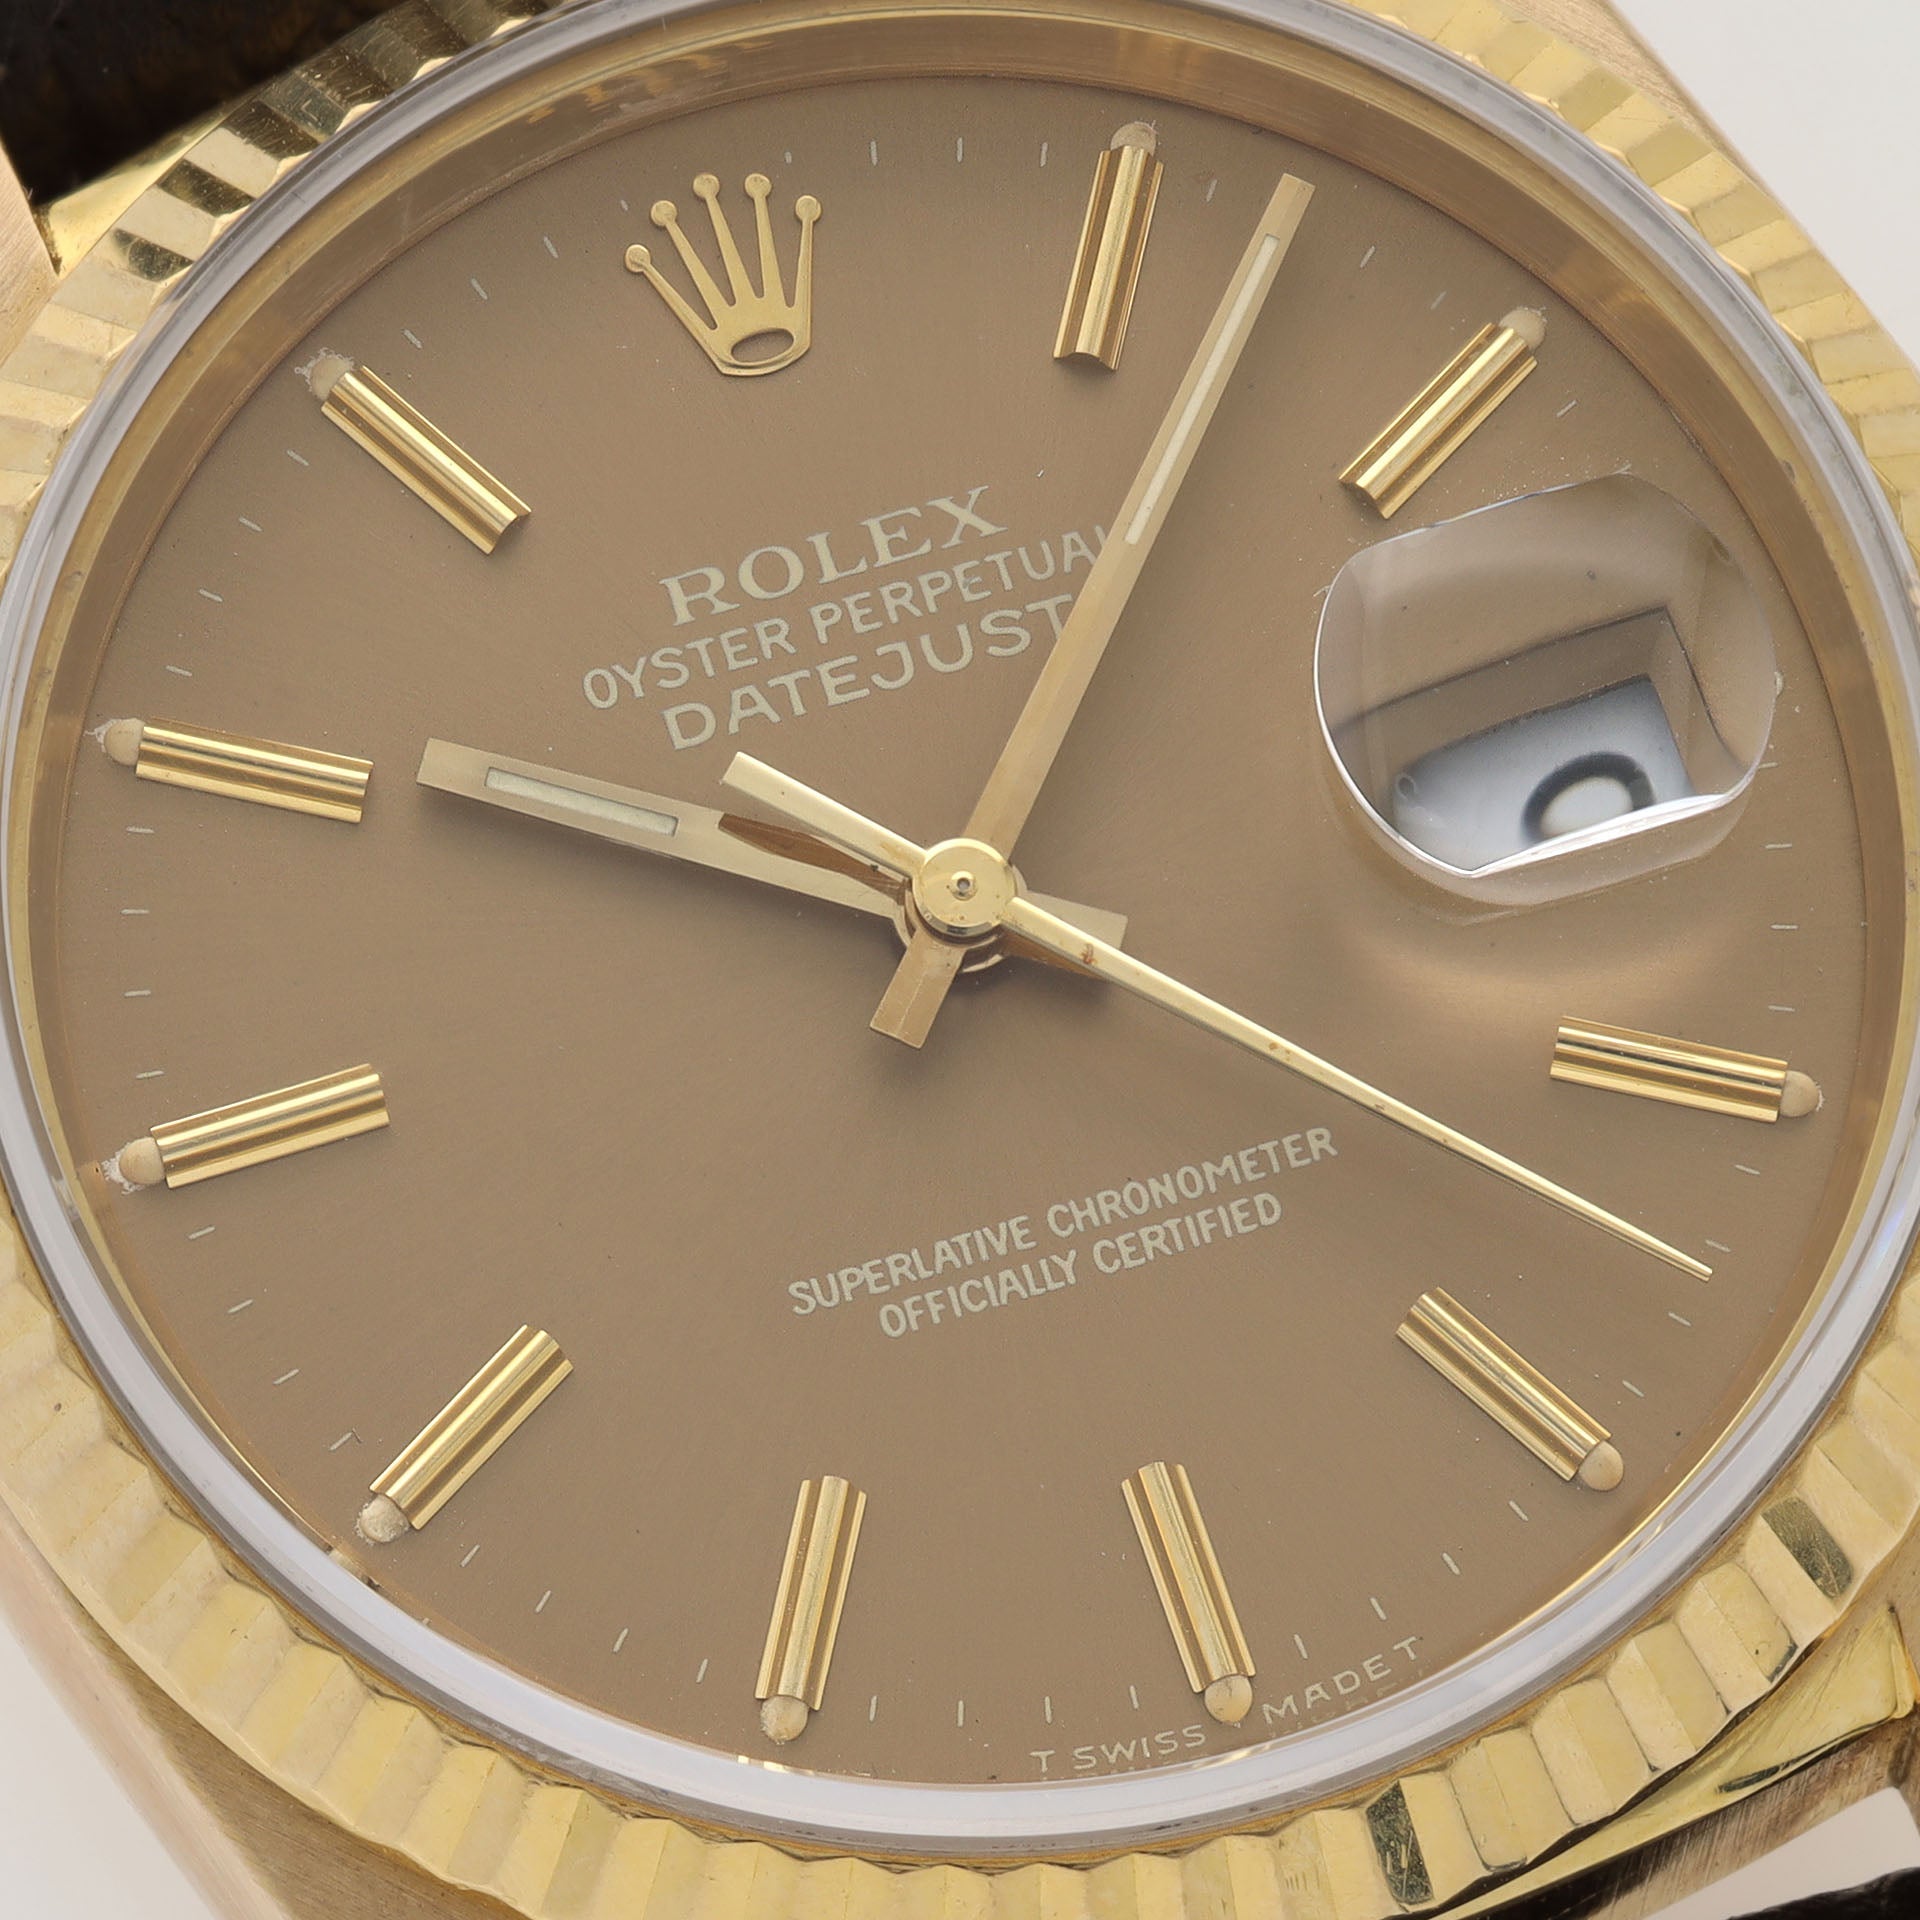 Rolex Datejust 16018 Yellow Gold Cappuccino Dial